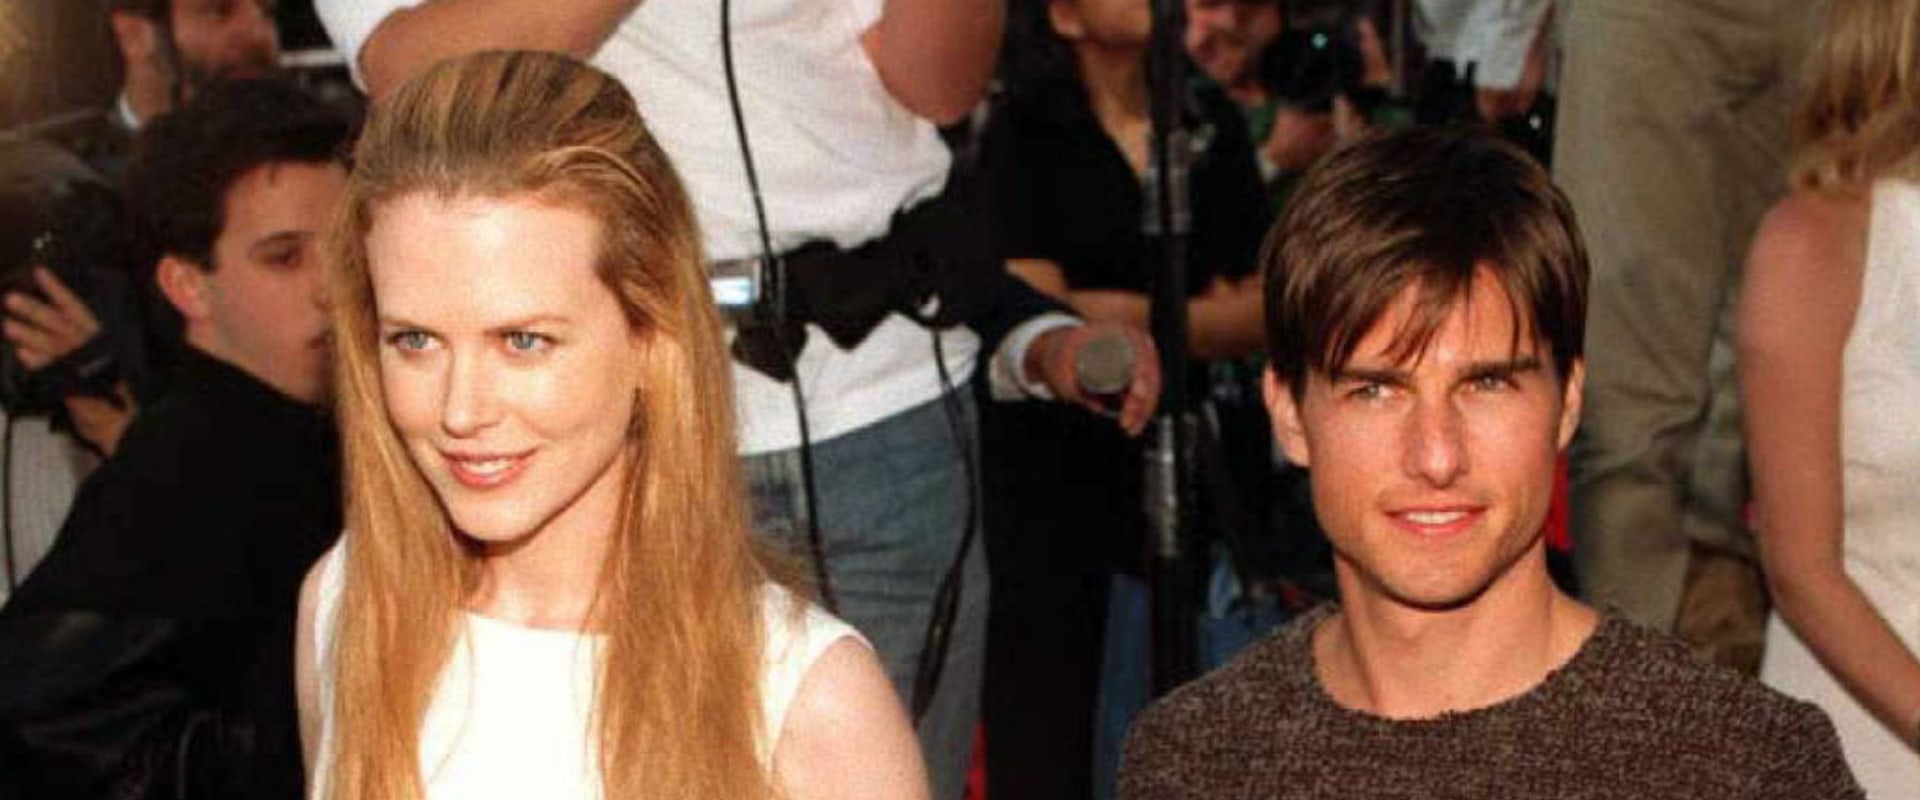 The Fascinating Age Difference Between Tom Cruise and Nicole Kidman